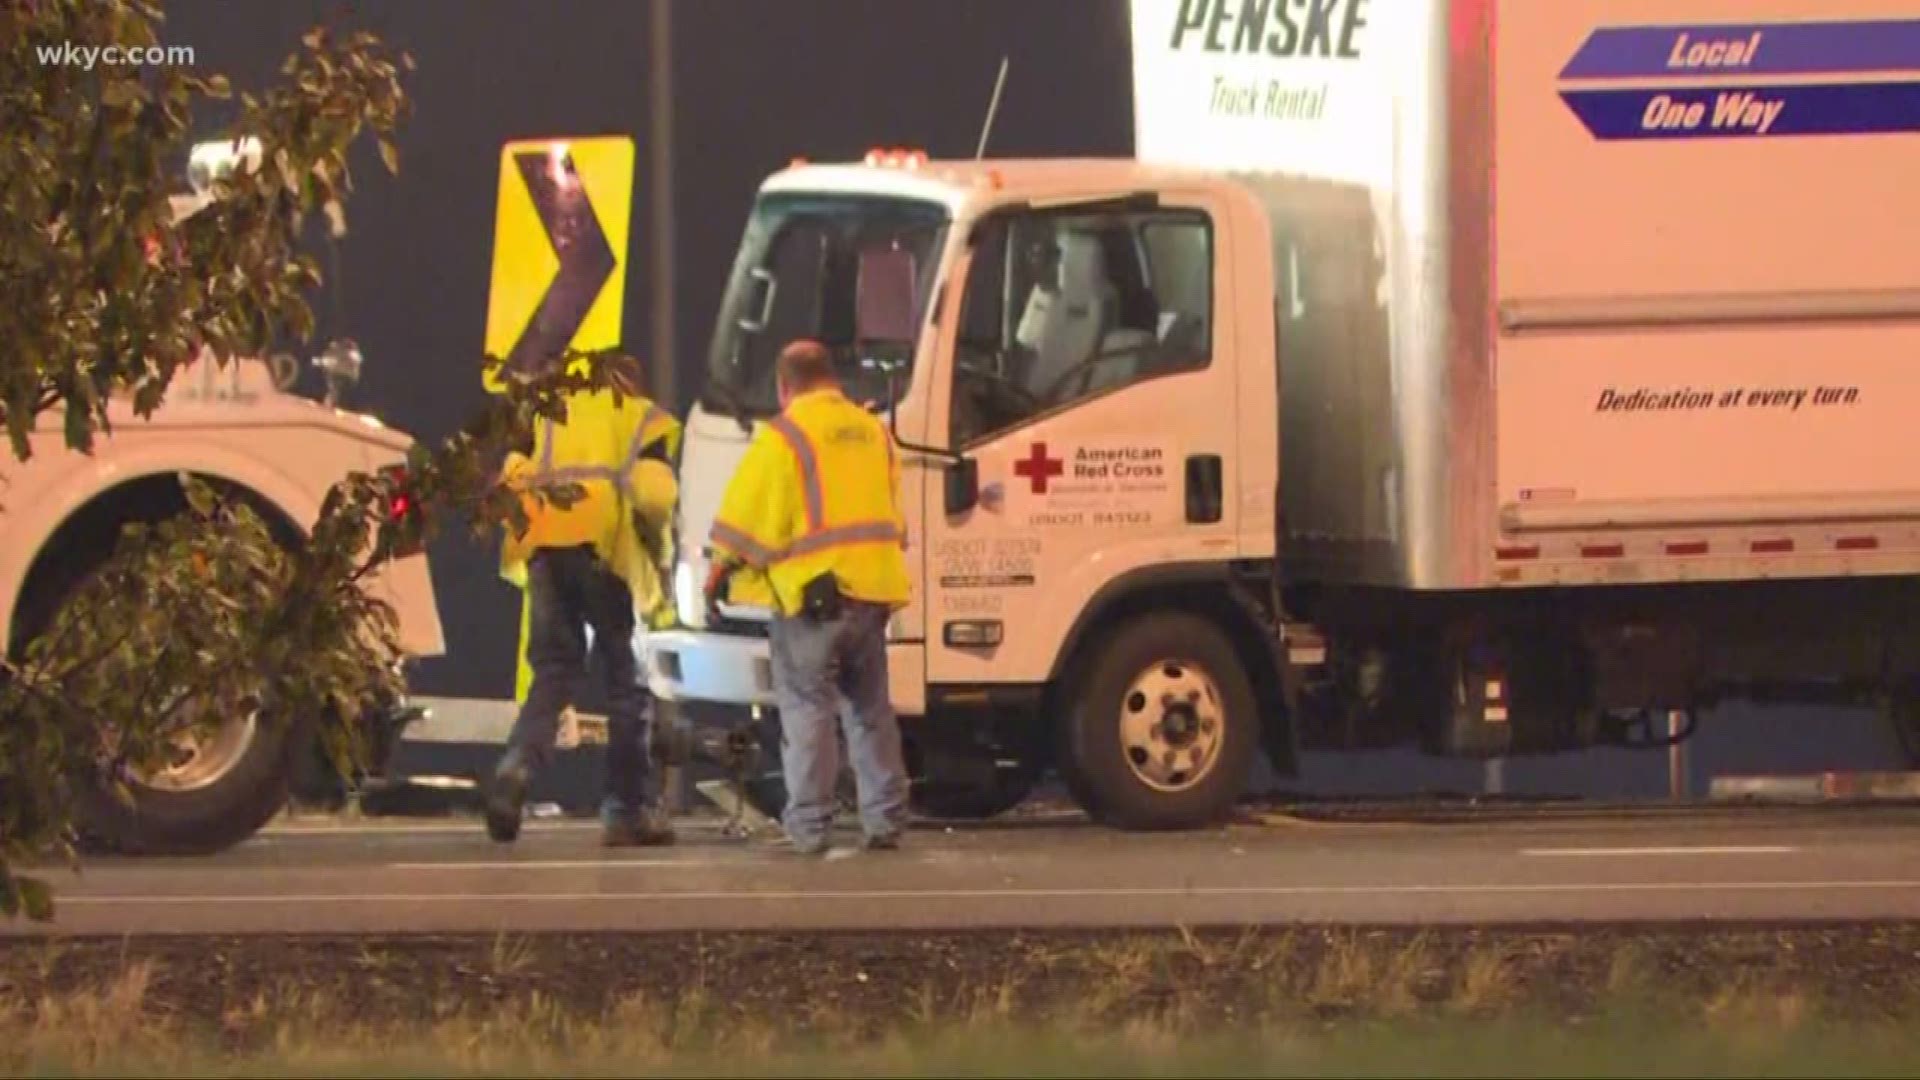 Oct. 24, 2017: A crash near downtown Cleveland closed part of I-77 North overnight. It happened where I-77 meets I-90 East. A truck rented by the American Red Cross, which was transporting blood donations, rolled over.